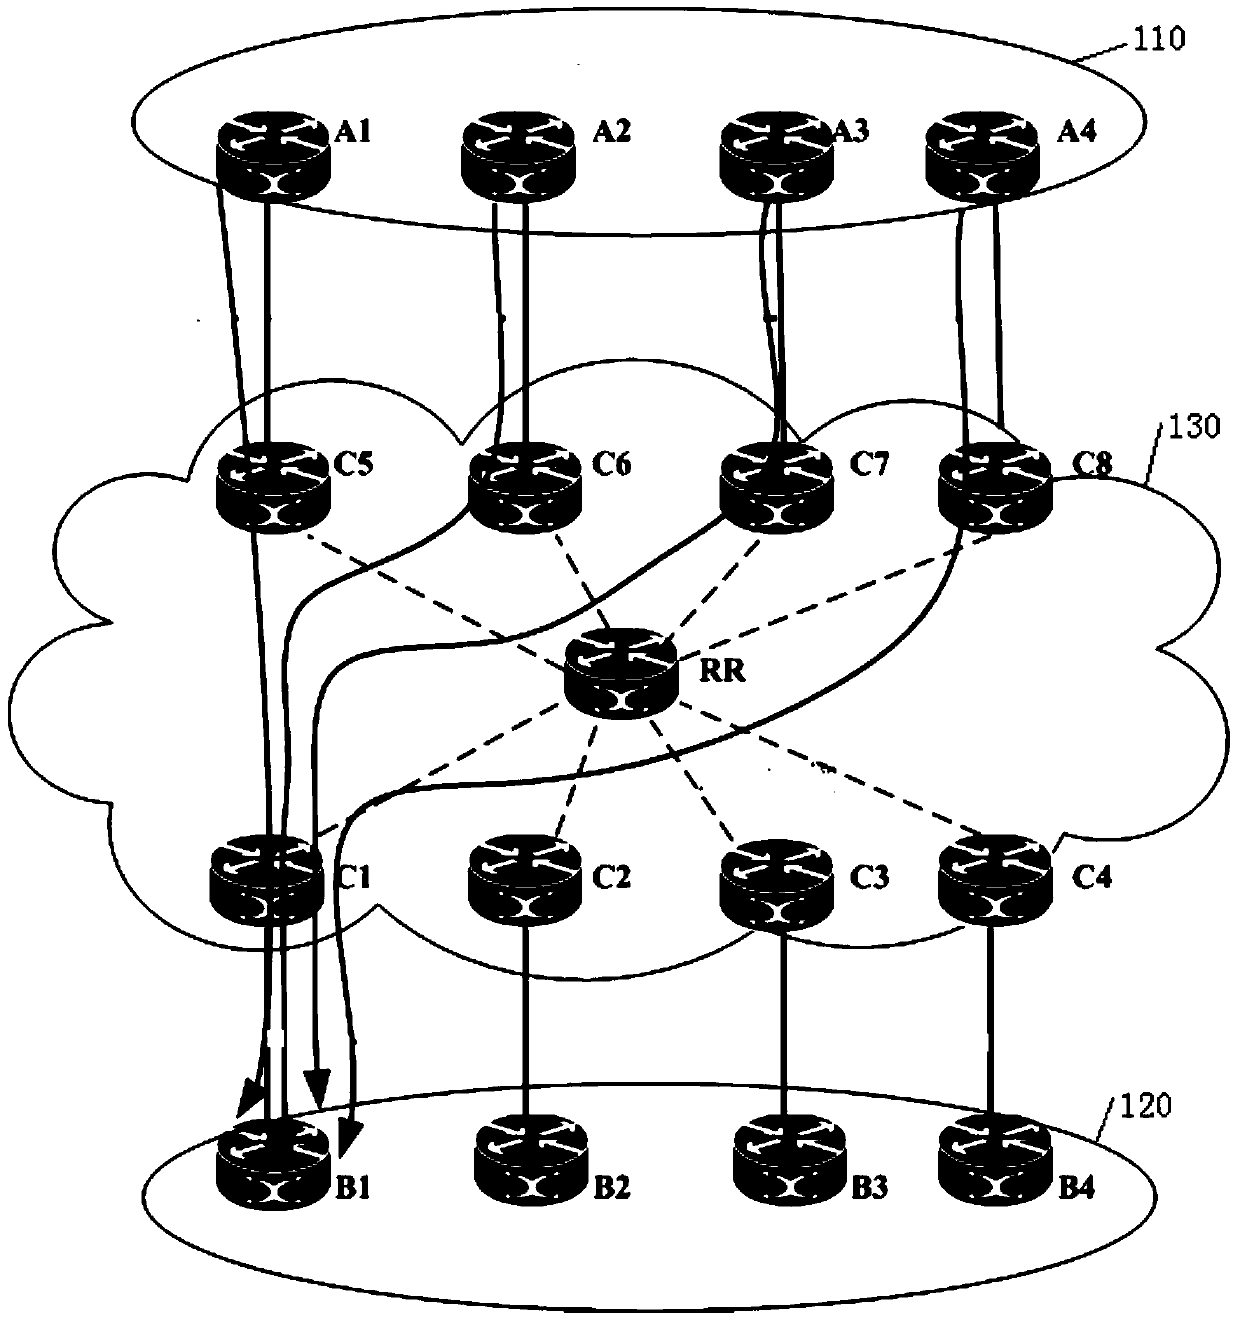 A routing reflector-based path optimization method and system